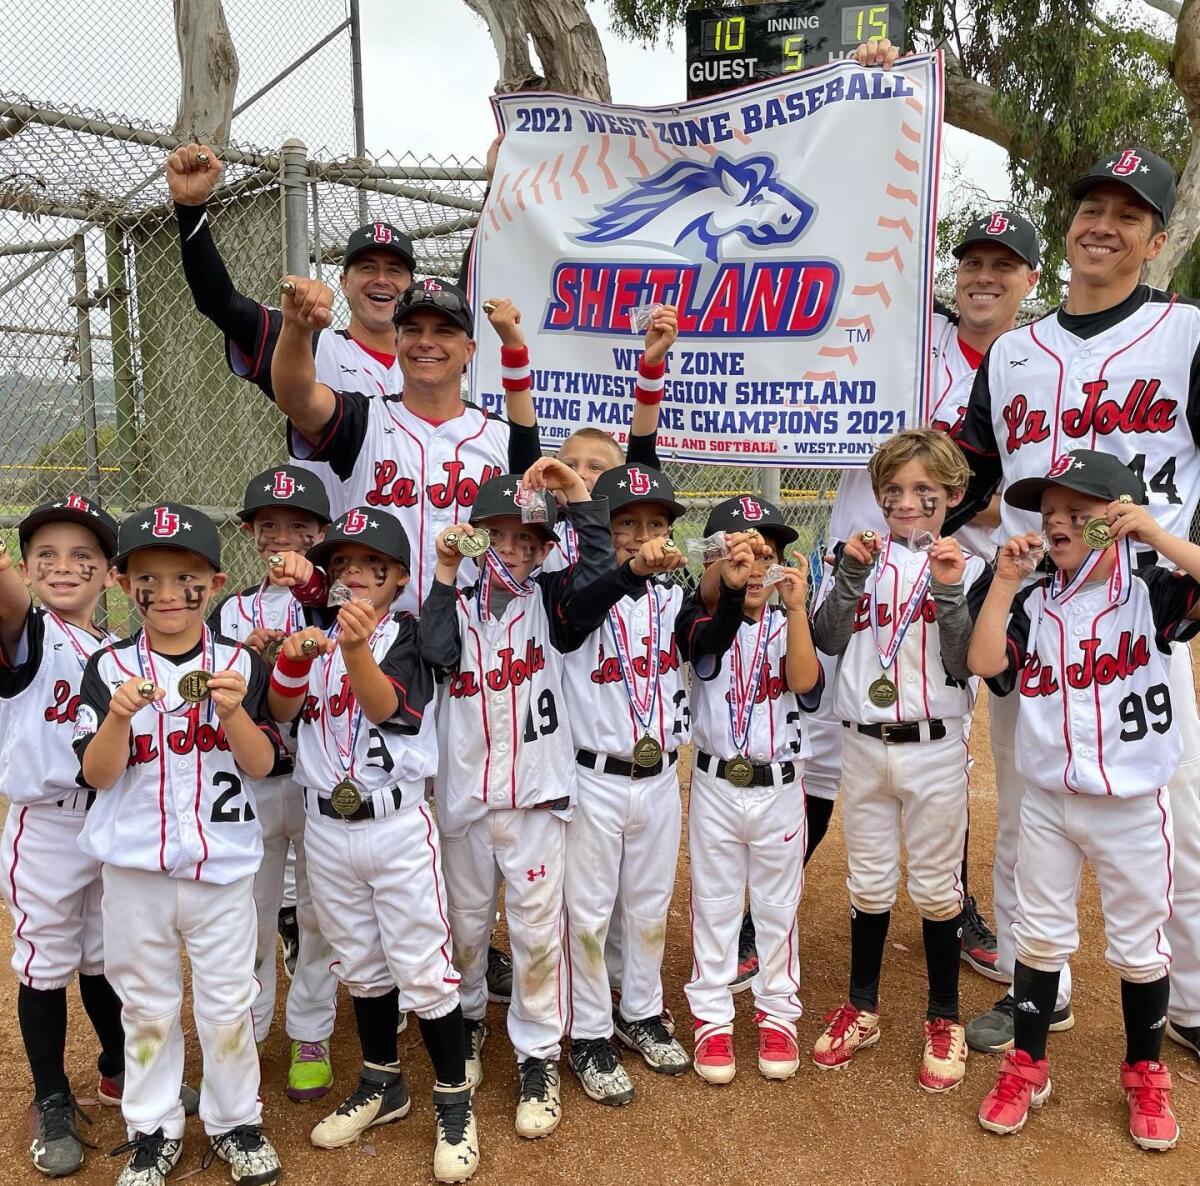 Local Little League team goes to World Series